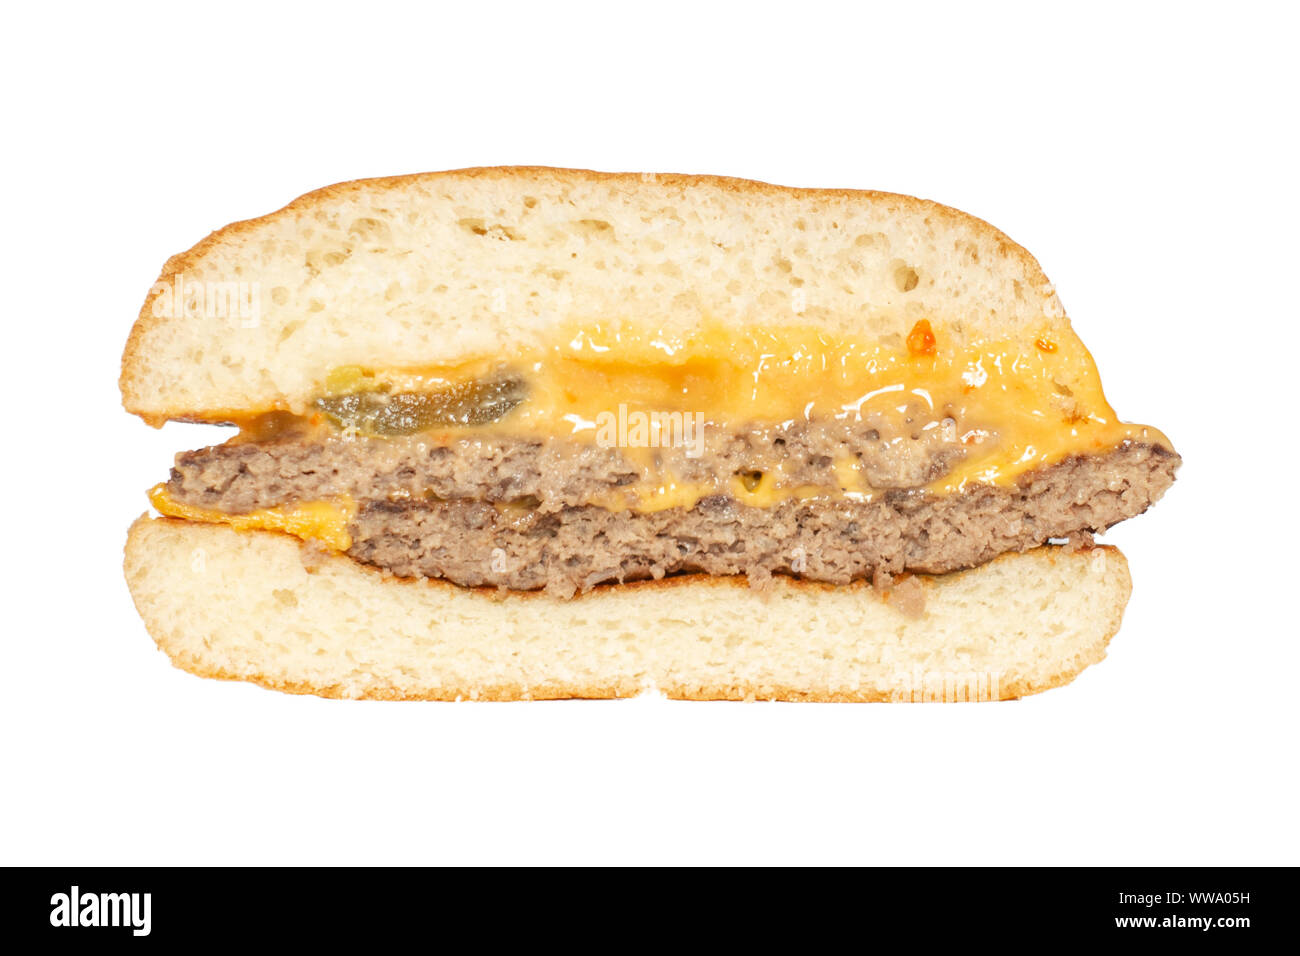 A cross-section view of the Chili Double Cheeseburger from McDonald's in Tbilisi, Georgia. Beef patty, cheese, spicy cheese sauce, jalapenos Stock Photo